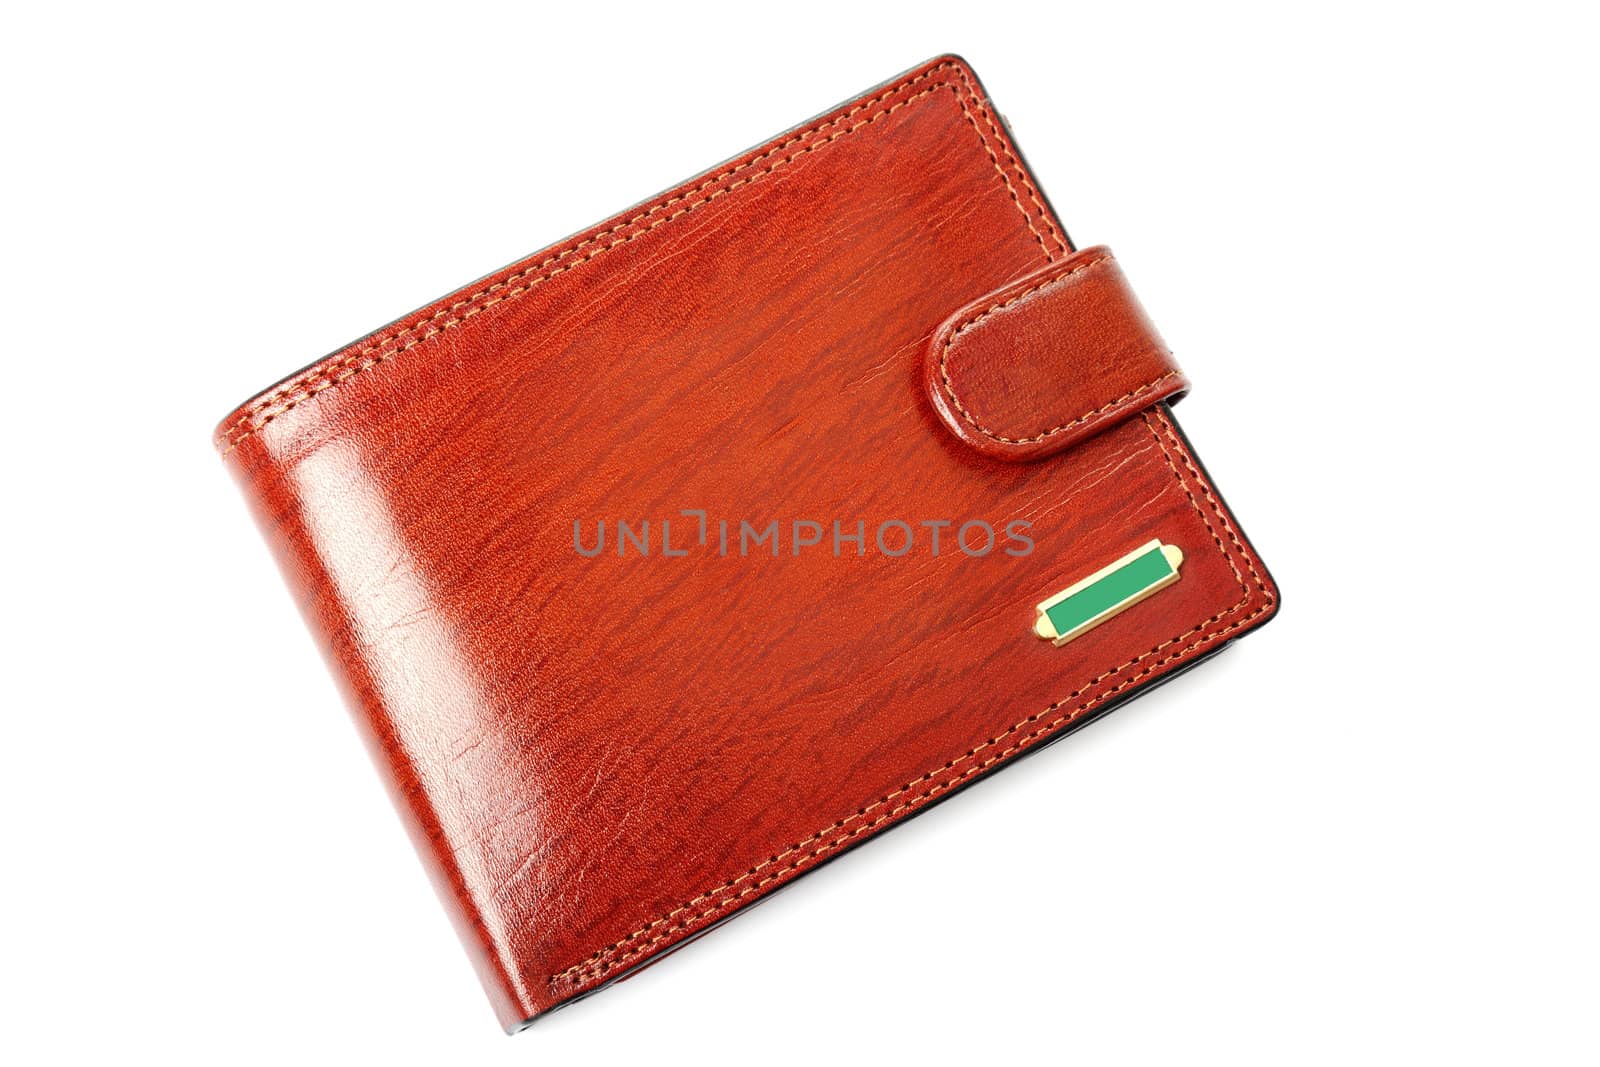 Brown wallet made of high quality leather isolated on white background.